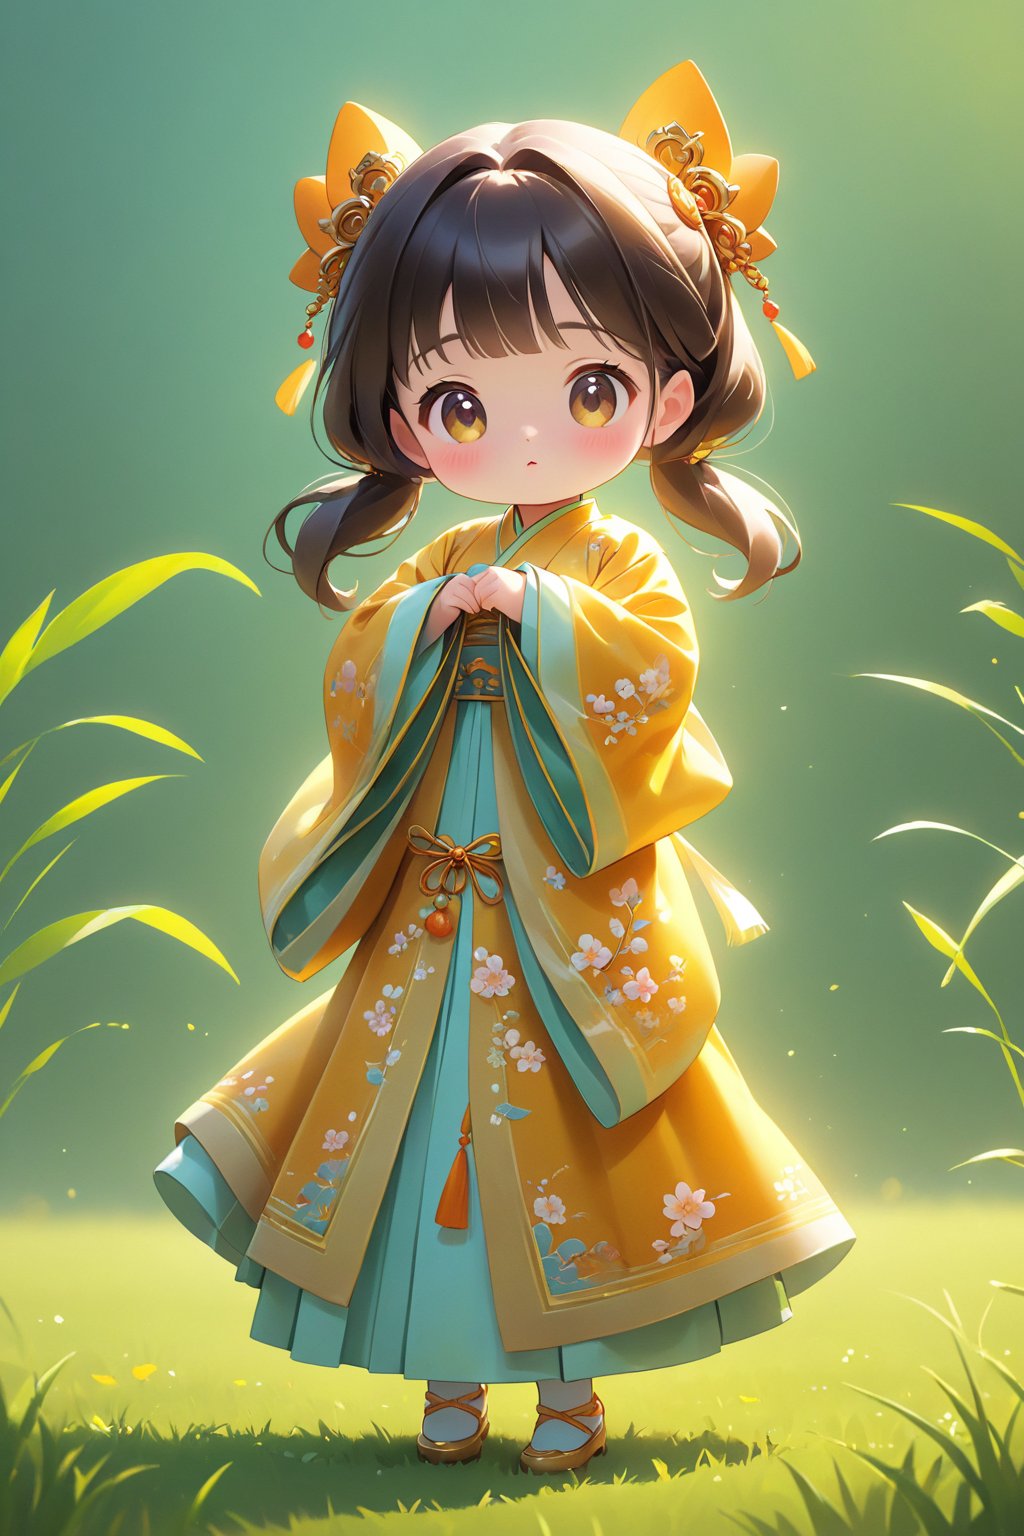 Children's Q version,Q version  standing on the grass,lovely digital painting, Clean background cute digital art, Cute detailed digital art, Cute cartoon character, Beautiful character painting, Chinese girl, Realistic cute girl painting, Beautiful digital artwork, Palace , A girl in Hanfu, cute character, Cute cartoon, digital cartoon painting art, Guviz-style artwork